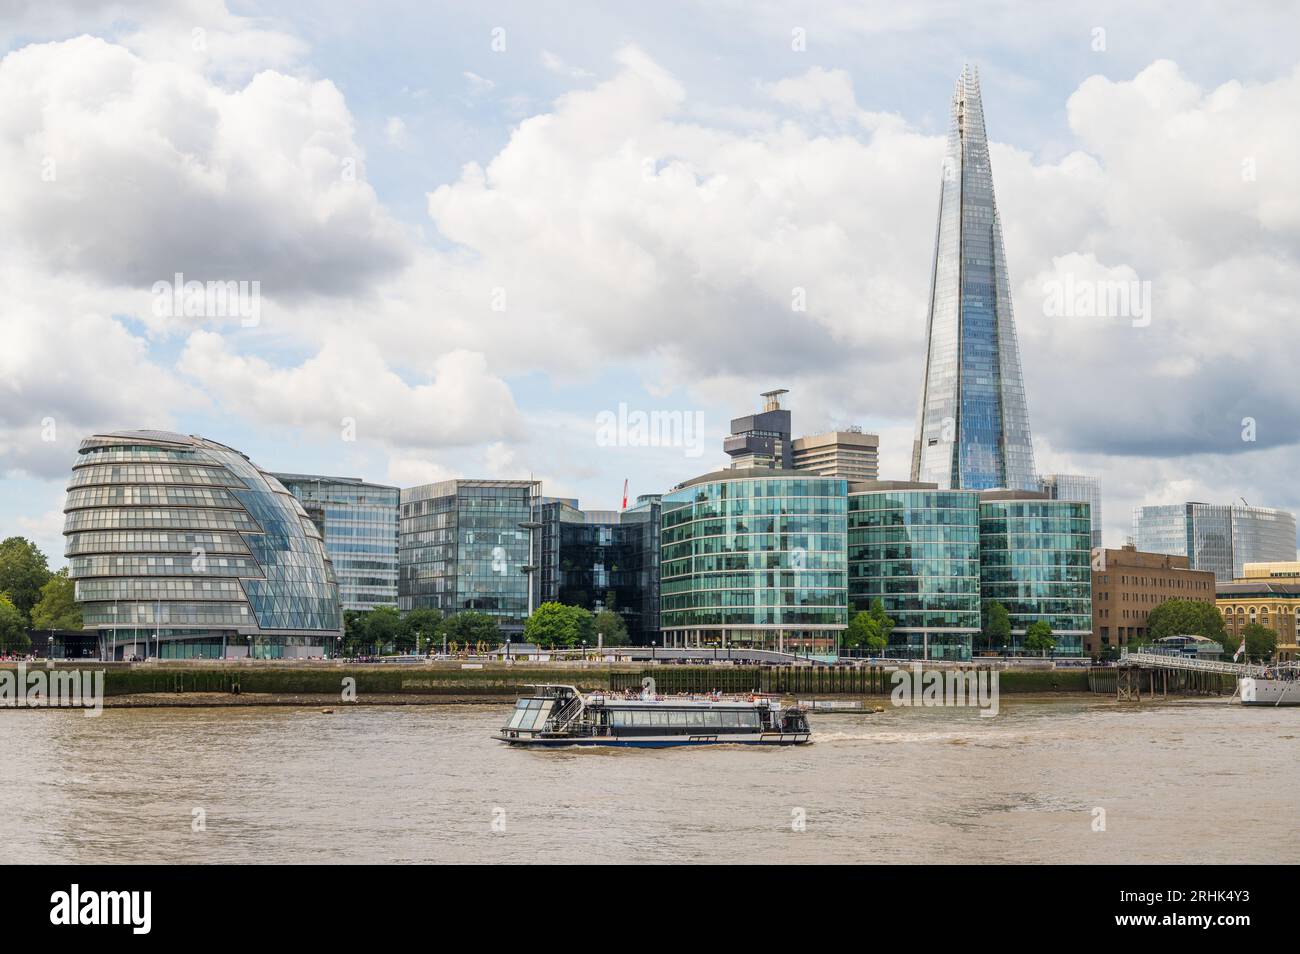 View of London City Hall, The Shard and the office buildings of More London as seen across the River Thames from Tower Wharf. London, England, UK Stock Photo